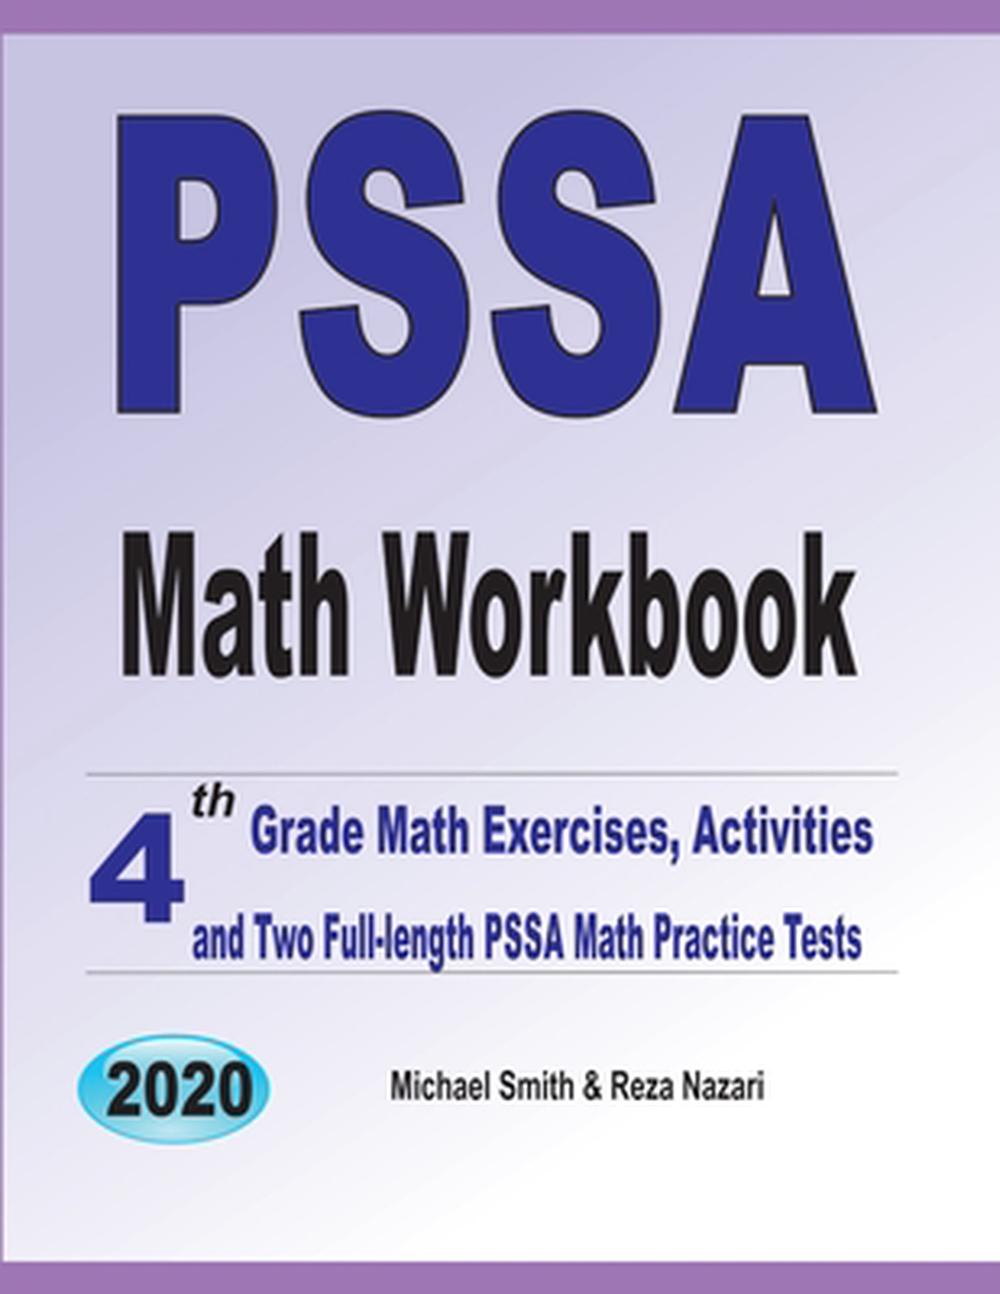 pssa-math-workbook-4th-grade-math-exercises-activities-and-two-full